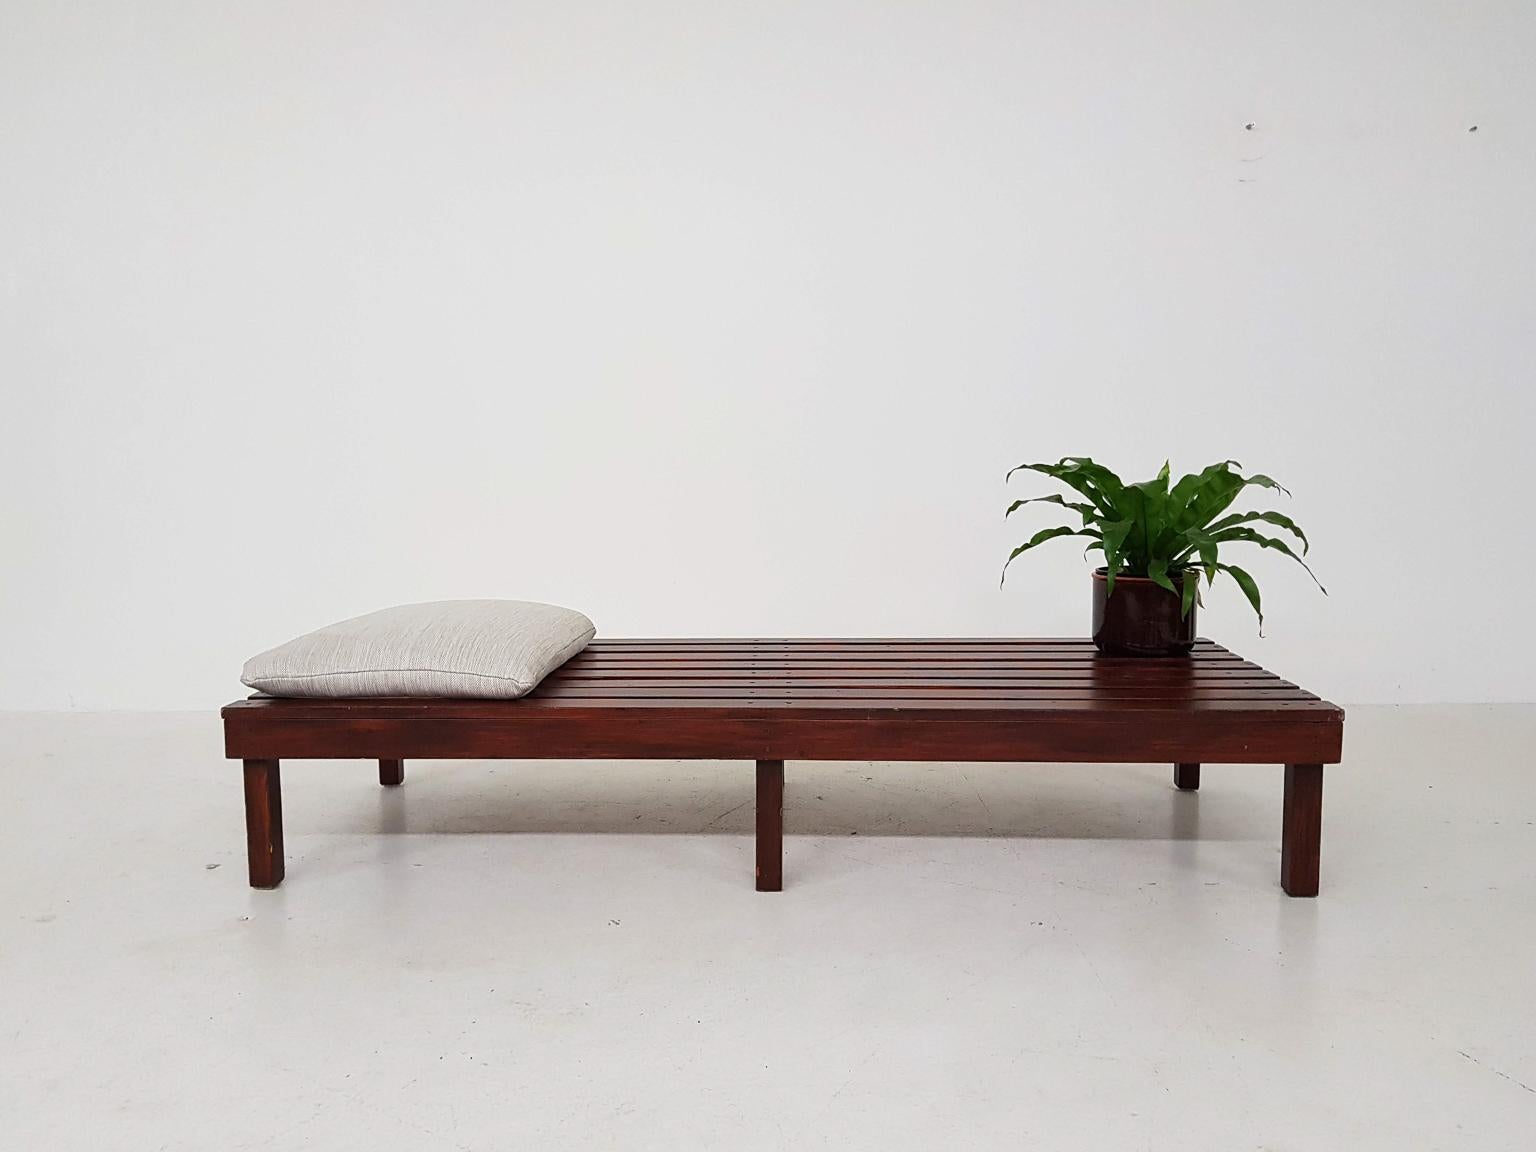 Minimalistic wooden slat bench or daybed from the midcentury in the style of Charlotte Perriand, Martin Visser and George Nelson.

The bed or bench is made of wood with a varnish. On top lays a re-upholstered cushion for more comfort when laying